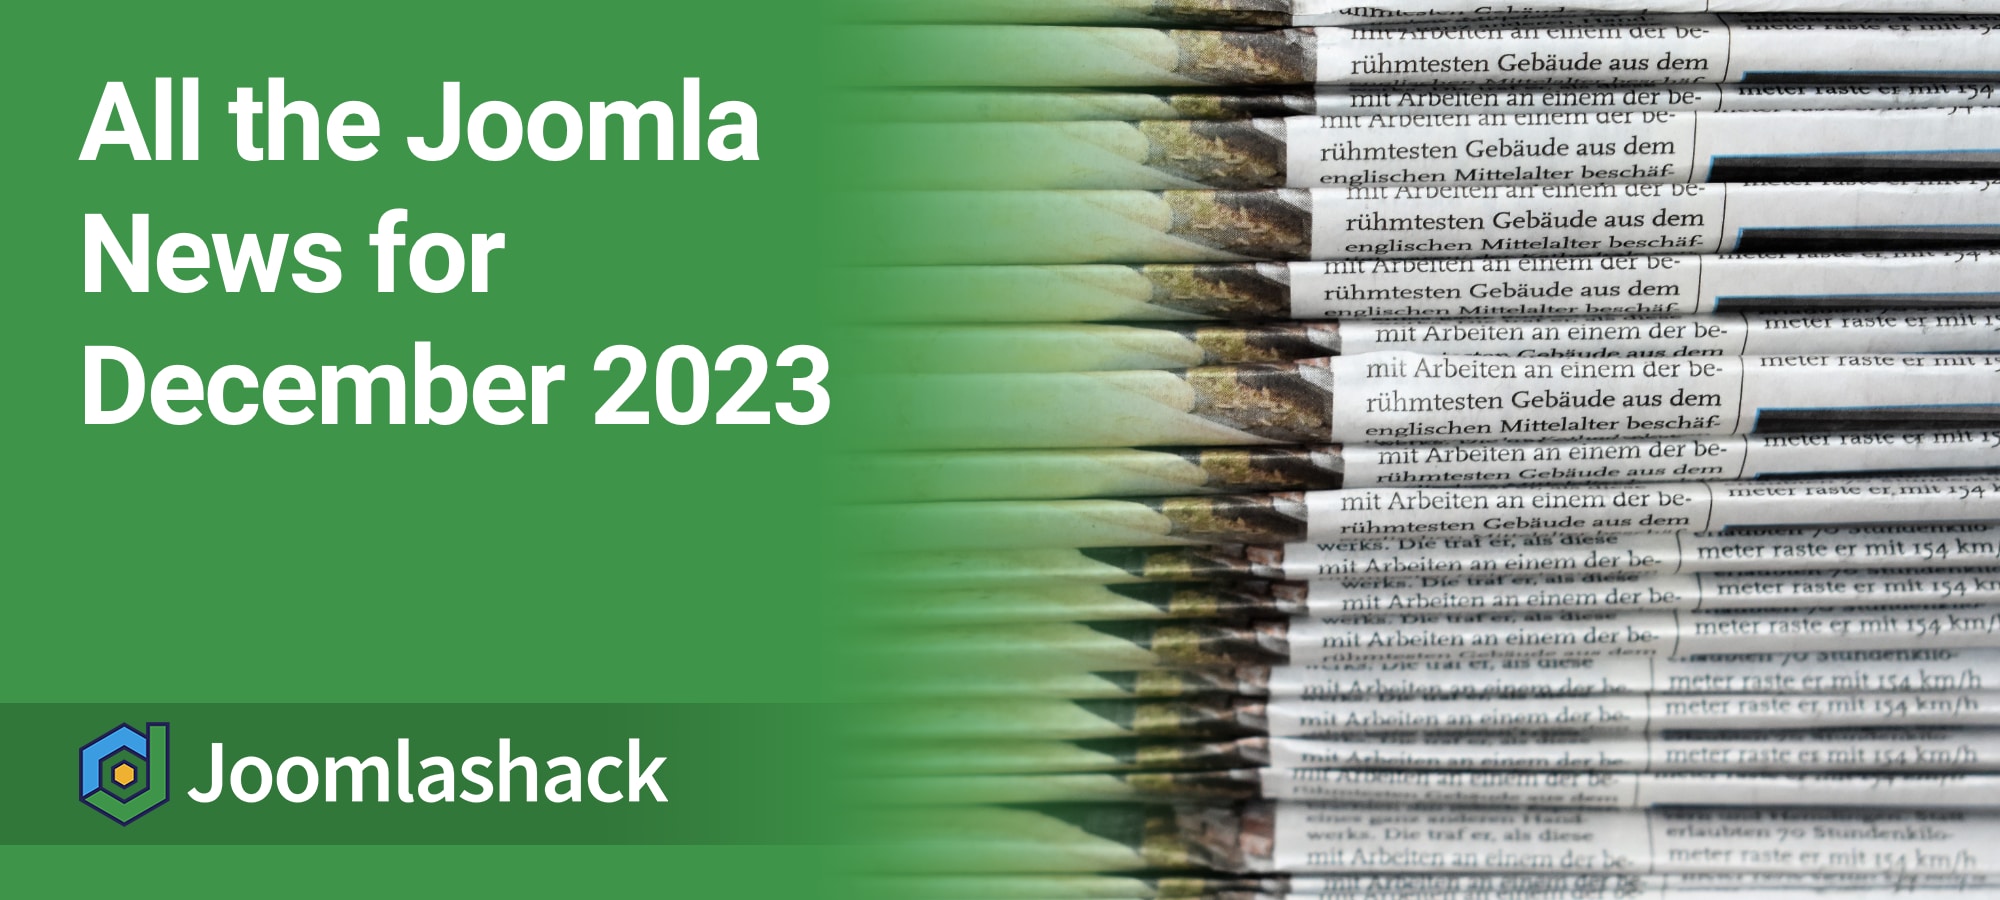 All the Joomla News for December 2023